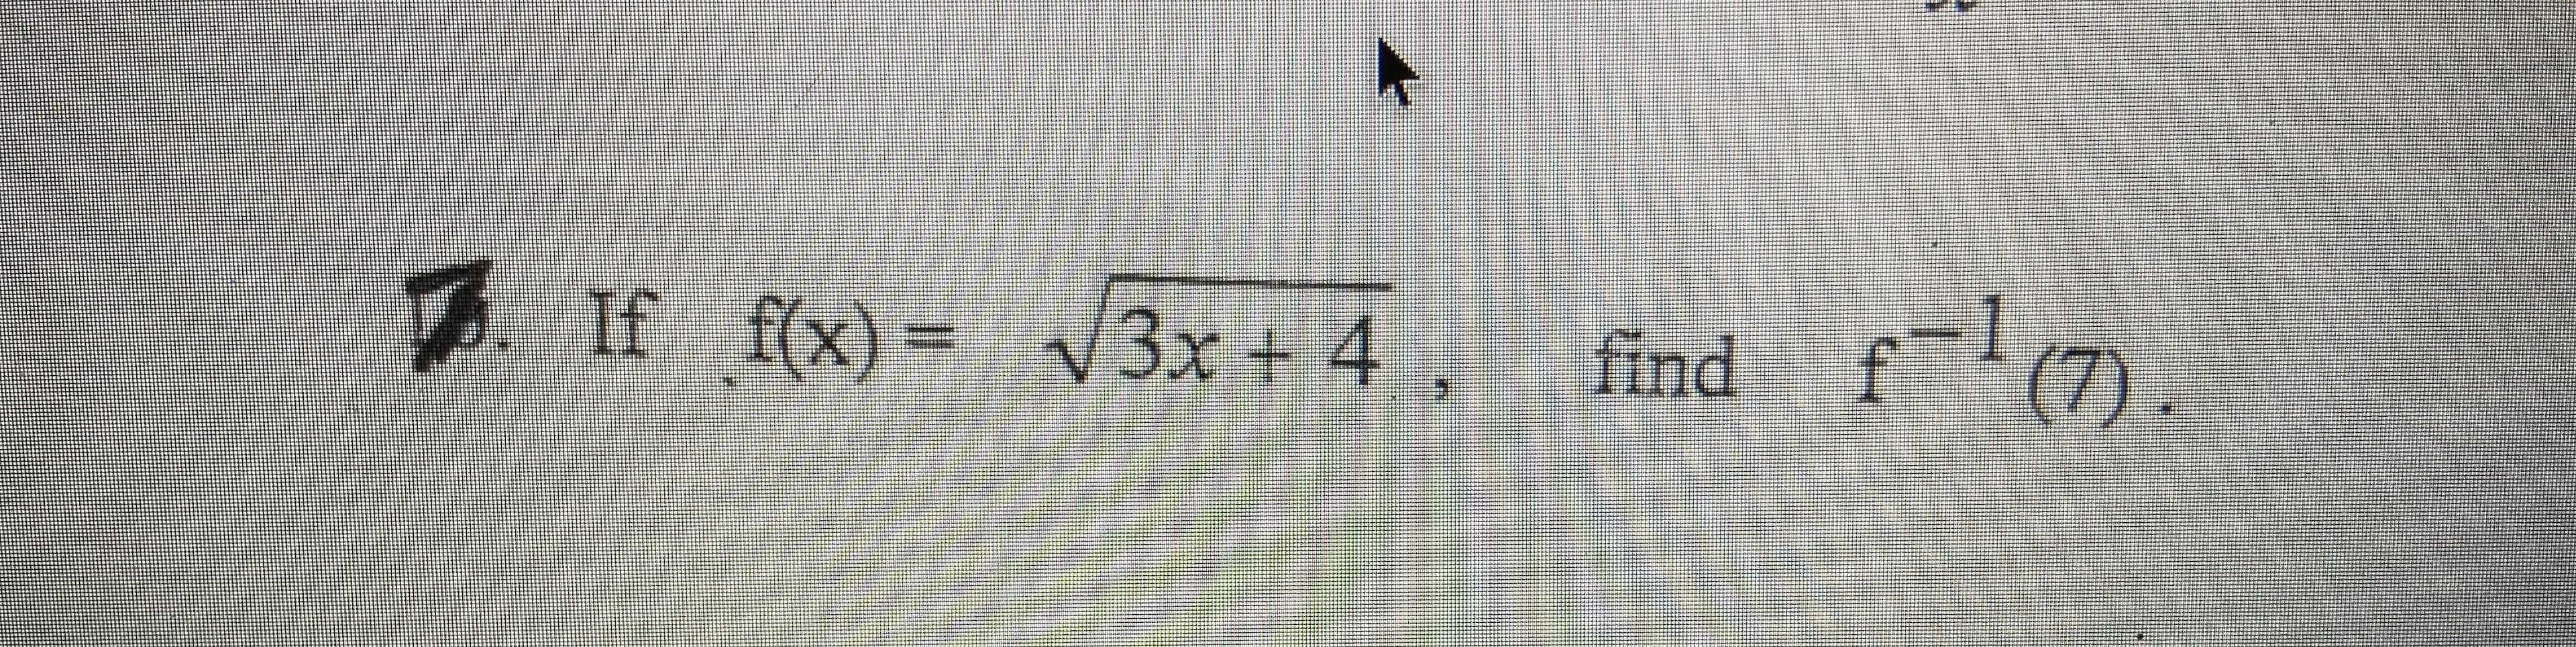 6. If f(x)= V3x + 4 ,
find
(7).
